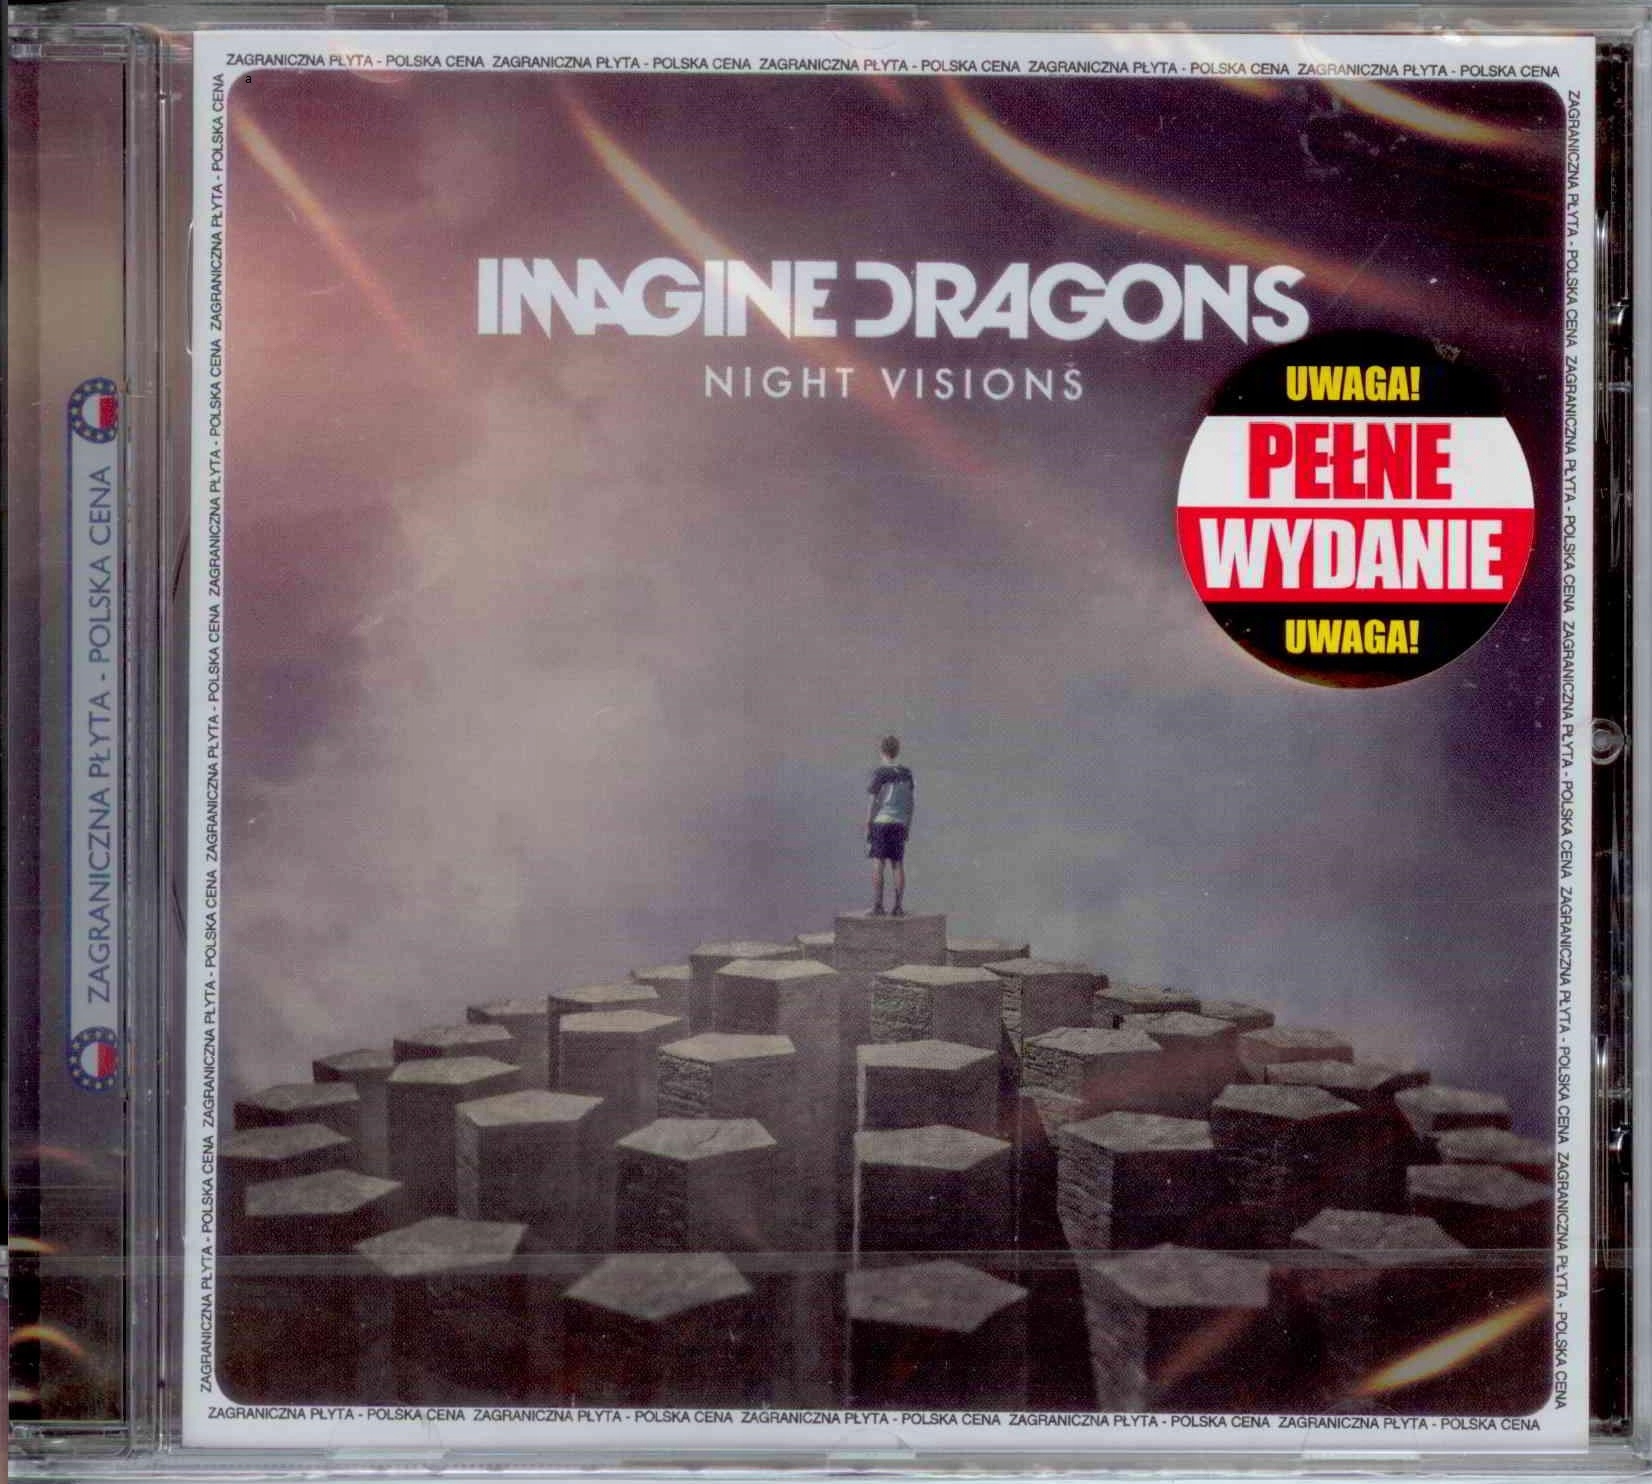 Imagine night. Imagine Dragons Night Visions. Imagine Dragons Night Visions обложка. Imagine Dragons Night Visions CD. Imagine Dragons Night Visions Cover.